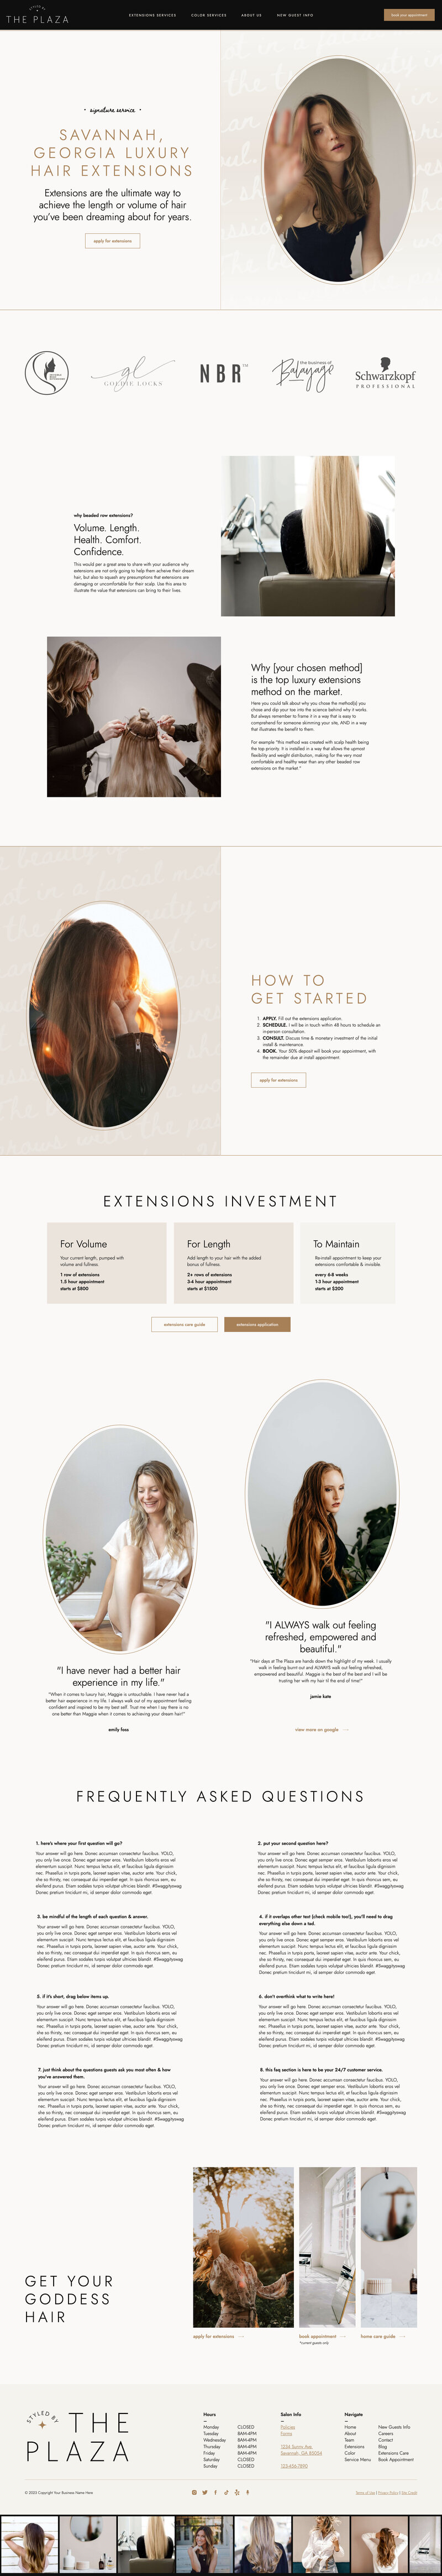 website-template-for-hair-stylists-salons-the-plaza-extensions-2023-03-30-13_15_39